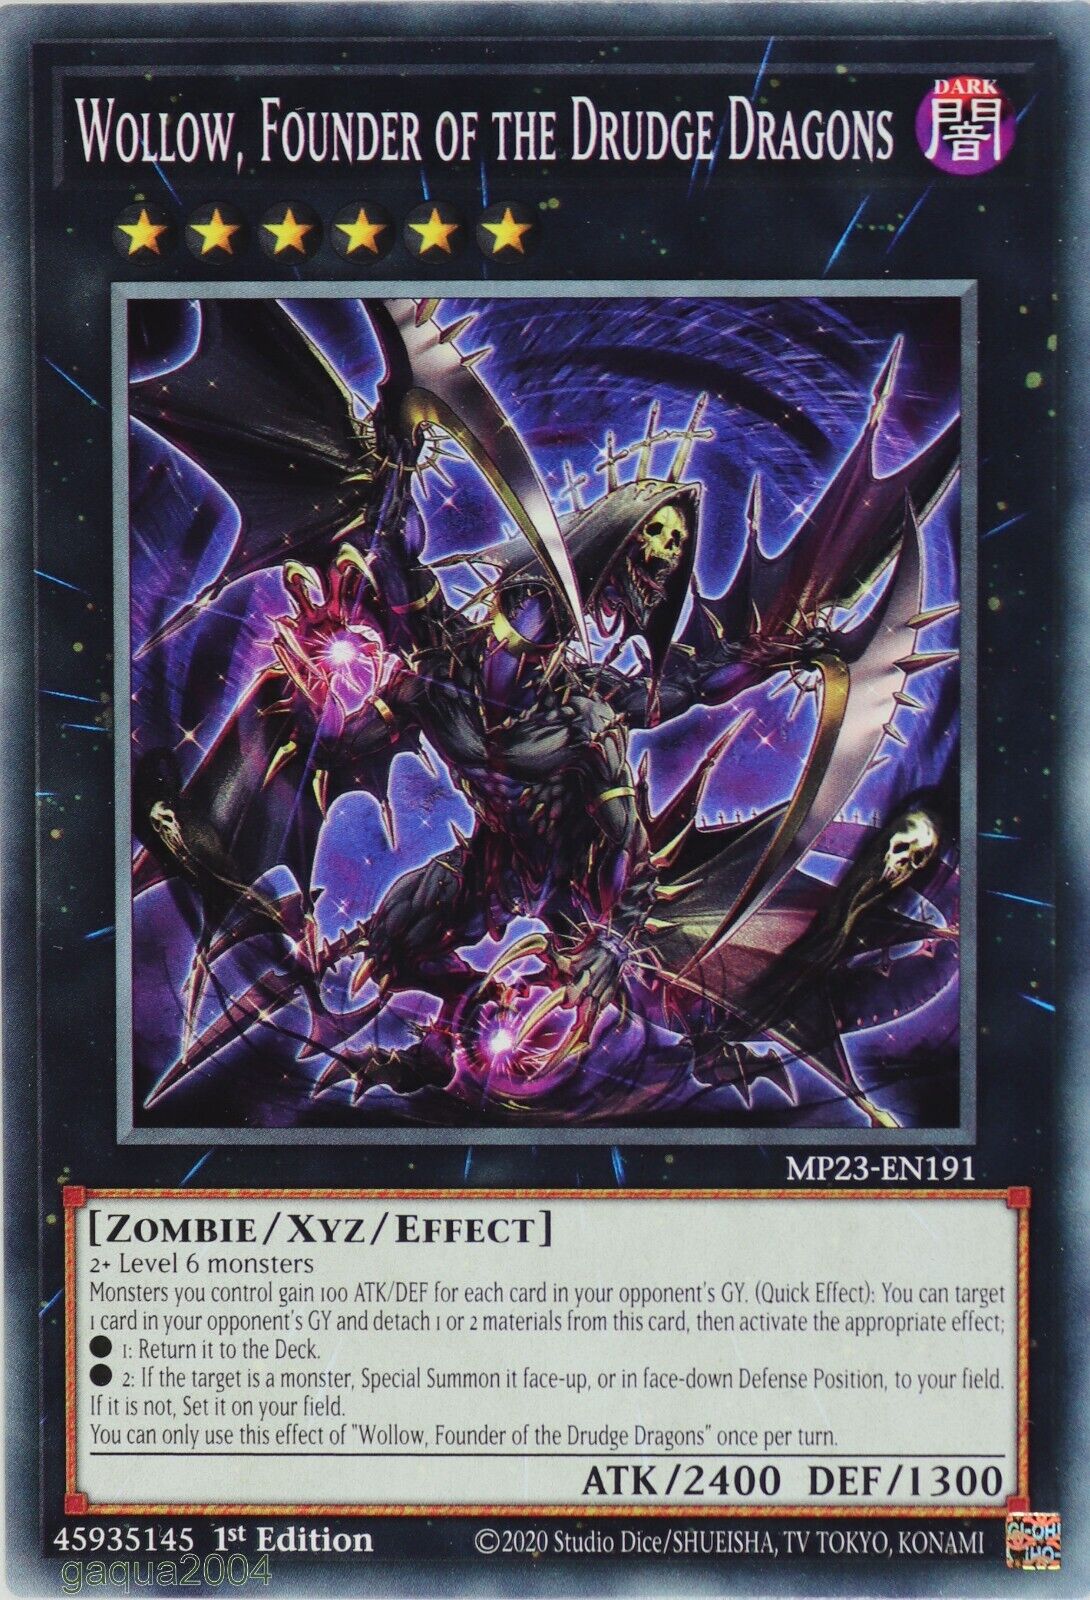 YuGiOh Wollow, Founder of the Drudge Dragons MP23-EN191 Common 1st Edition